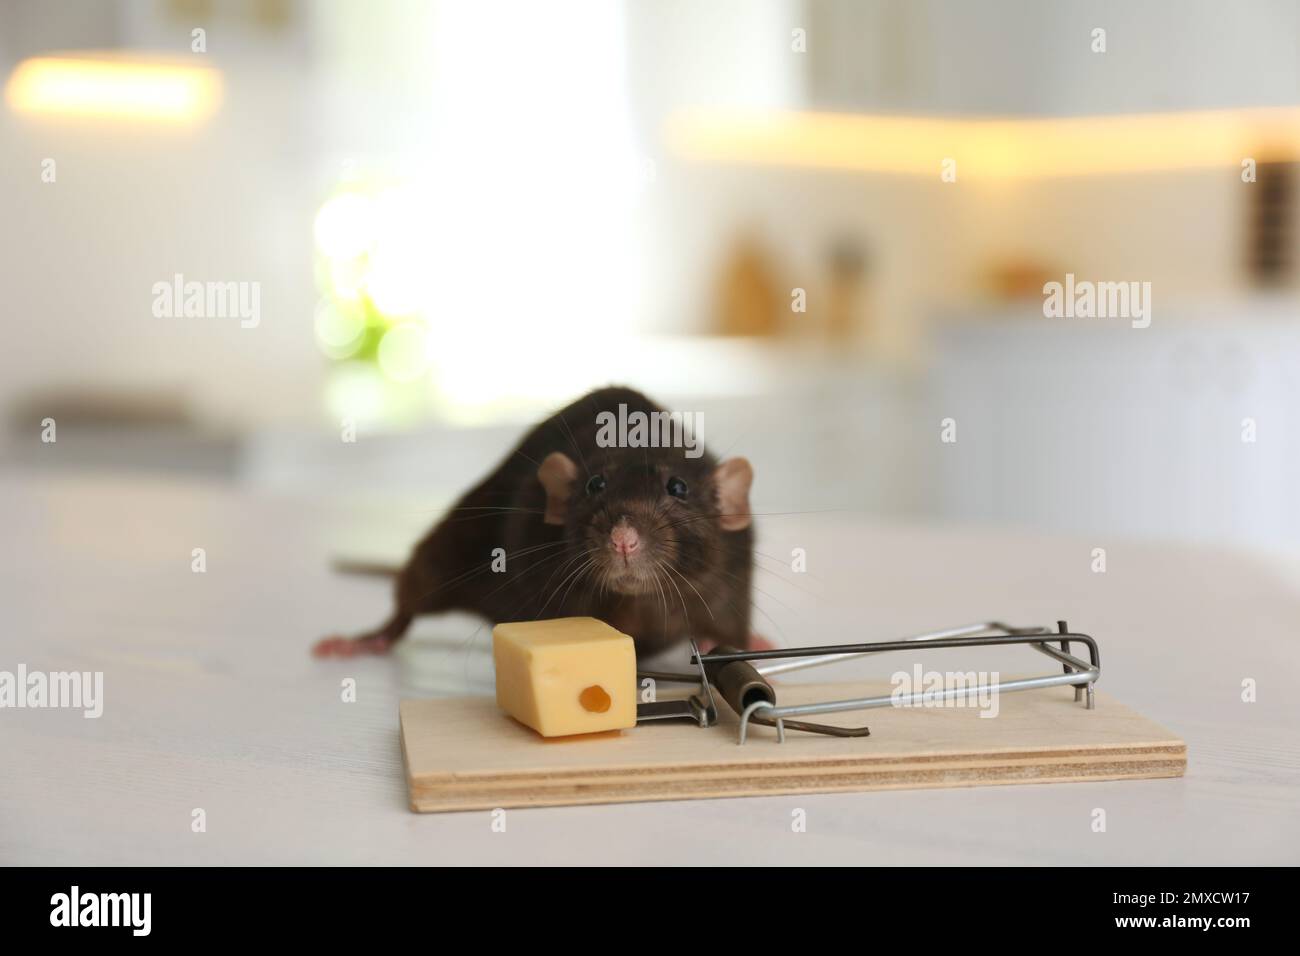 https://c8.alamy.com/comp/2MXCW17/rat-and-mousetrap-with-cheese-indoors-pest-control-2MXCW17.jpg